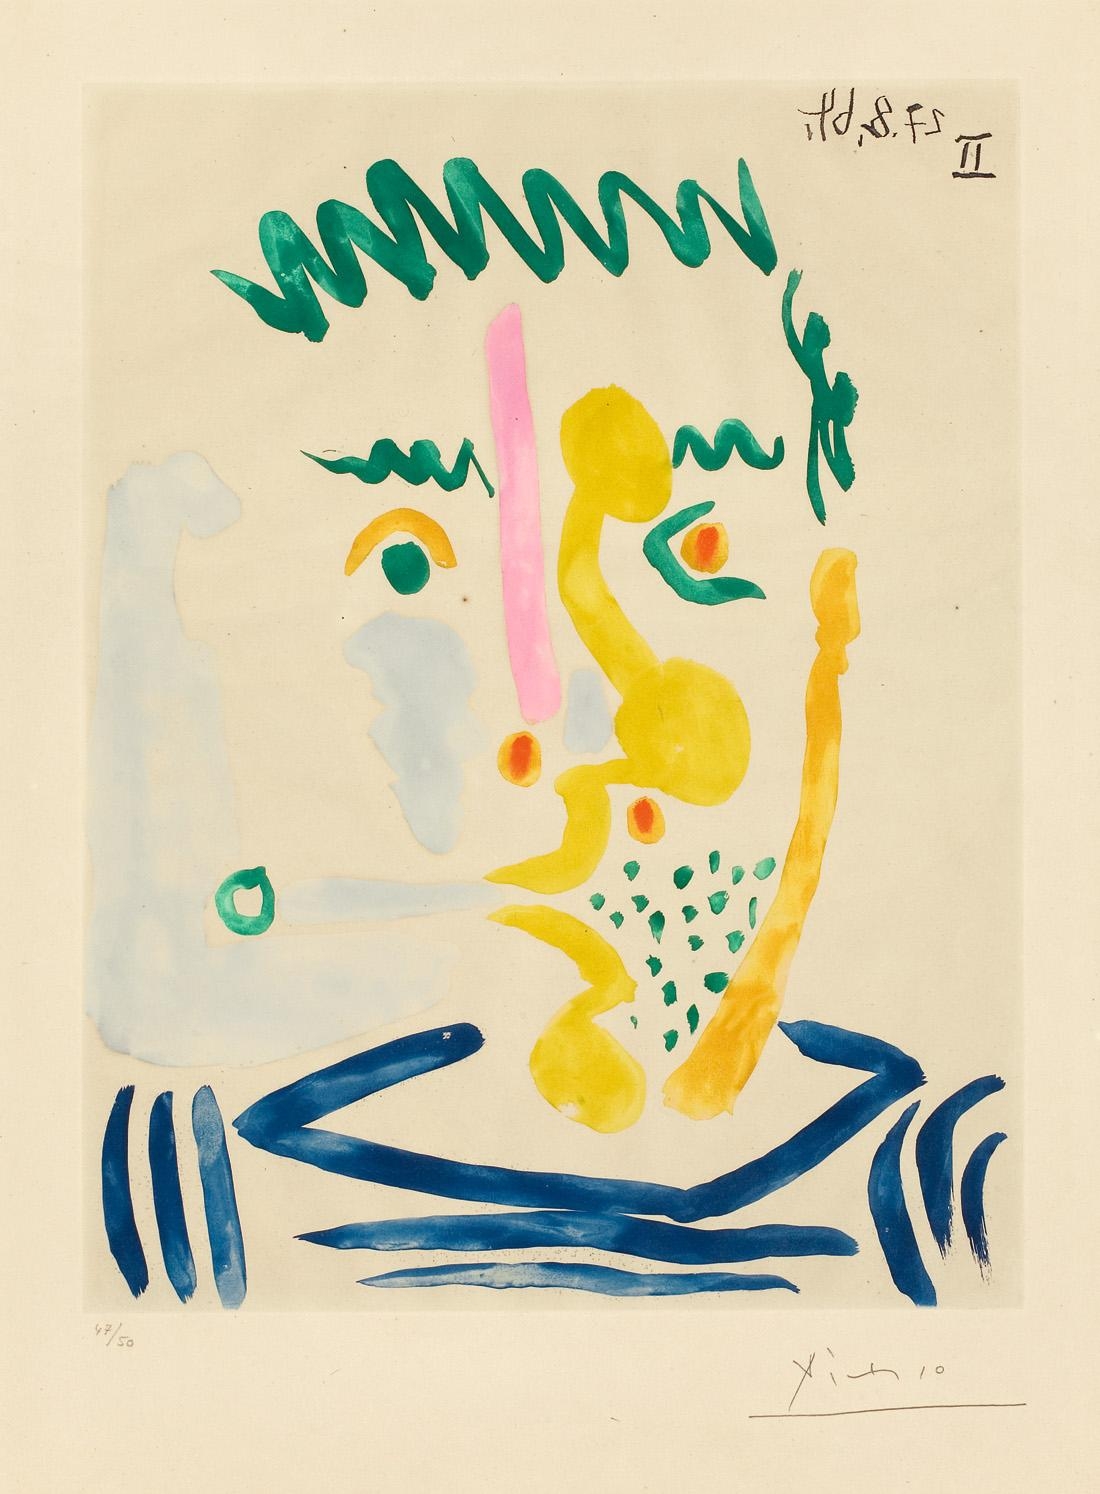 Artwork by Pablo Picasso, Fumeur barbu, Made of Colour aquatint on laid paper